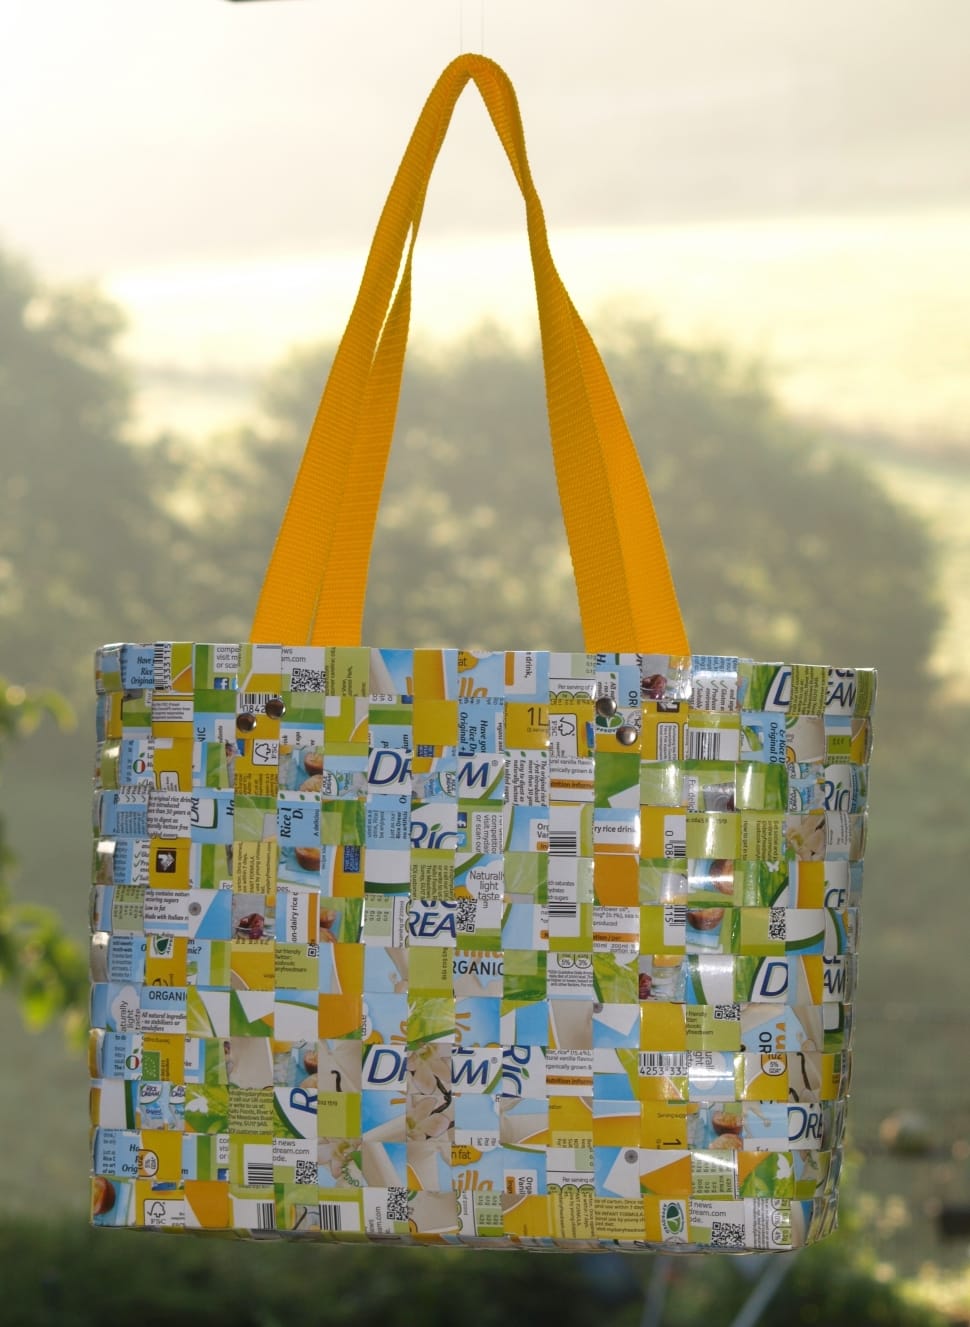 recycle-wattle-hand-labor-woven-bag-wallpaper-preview.jpg